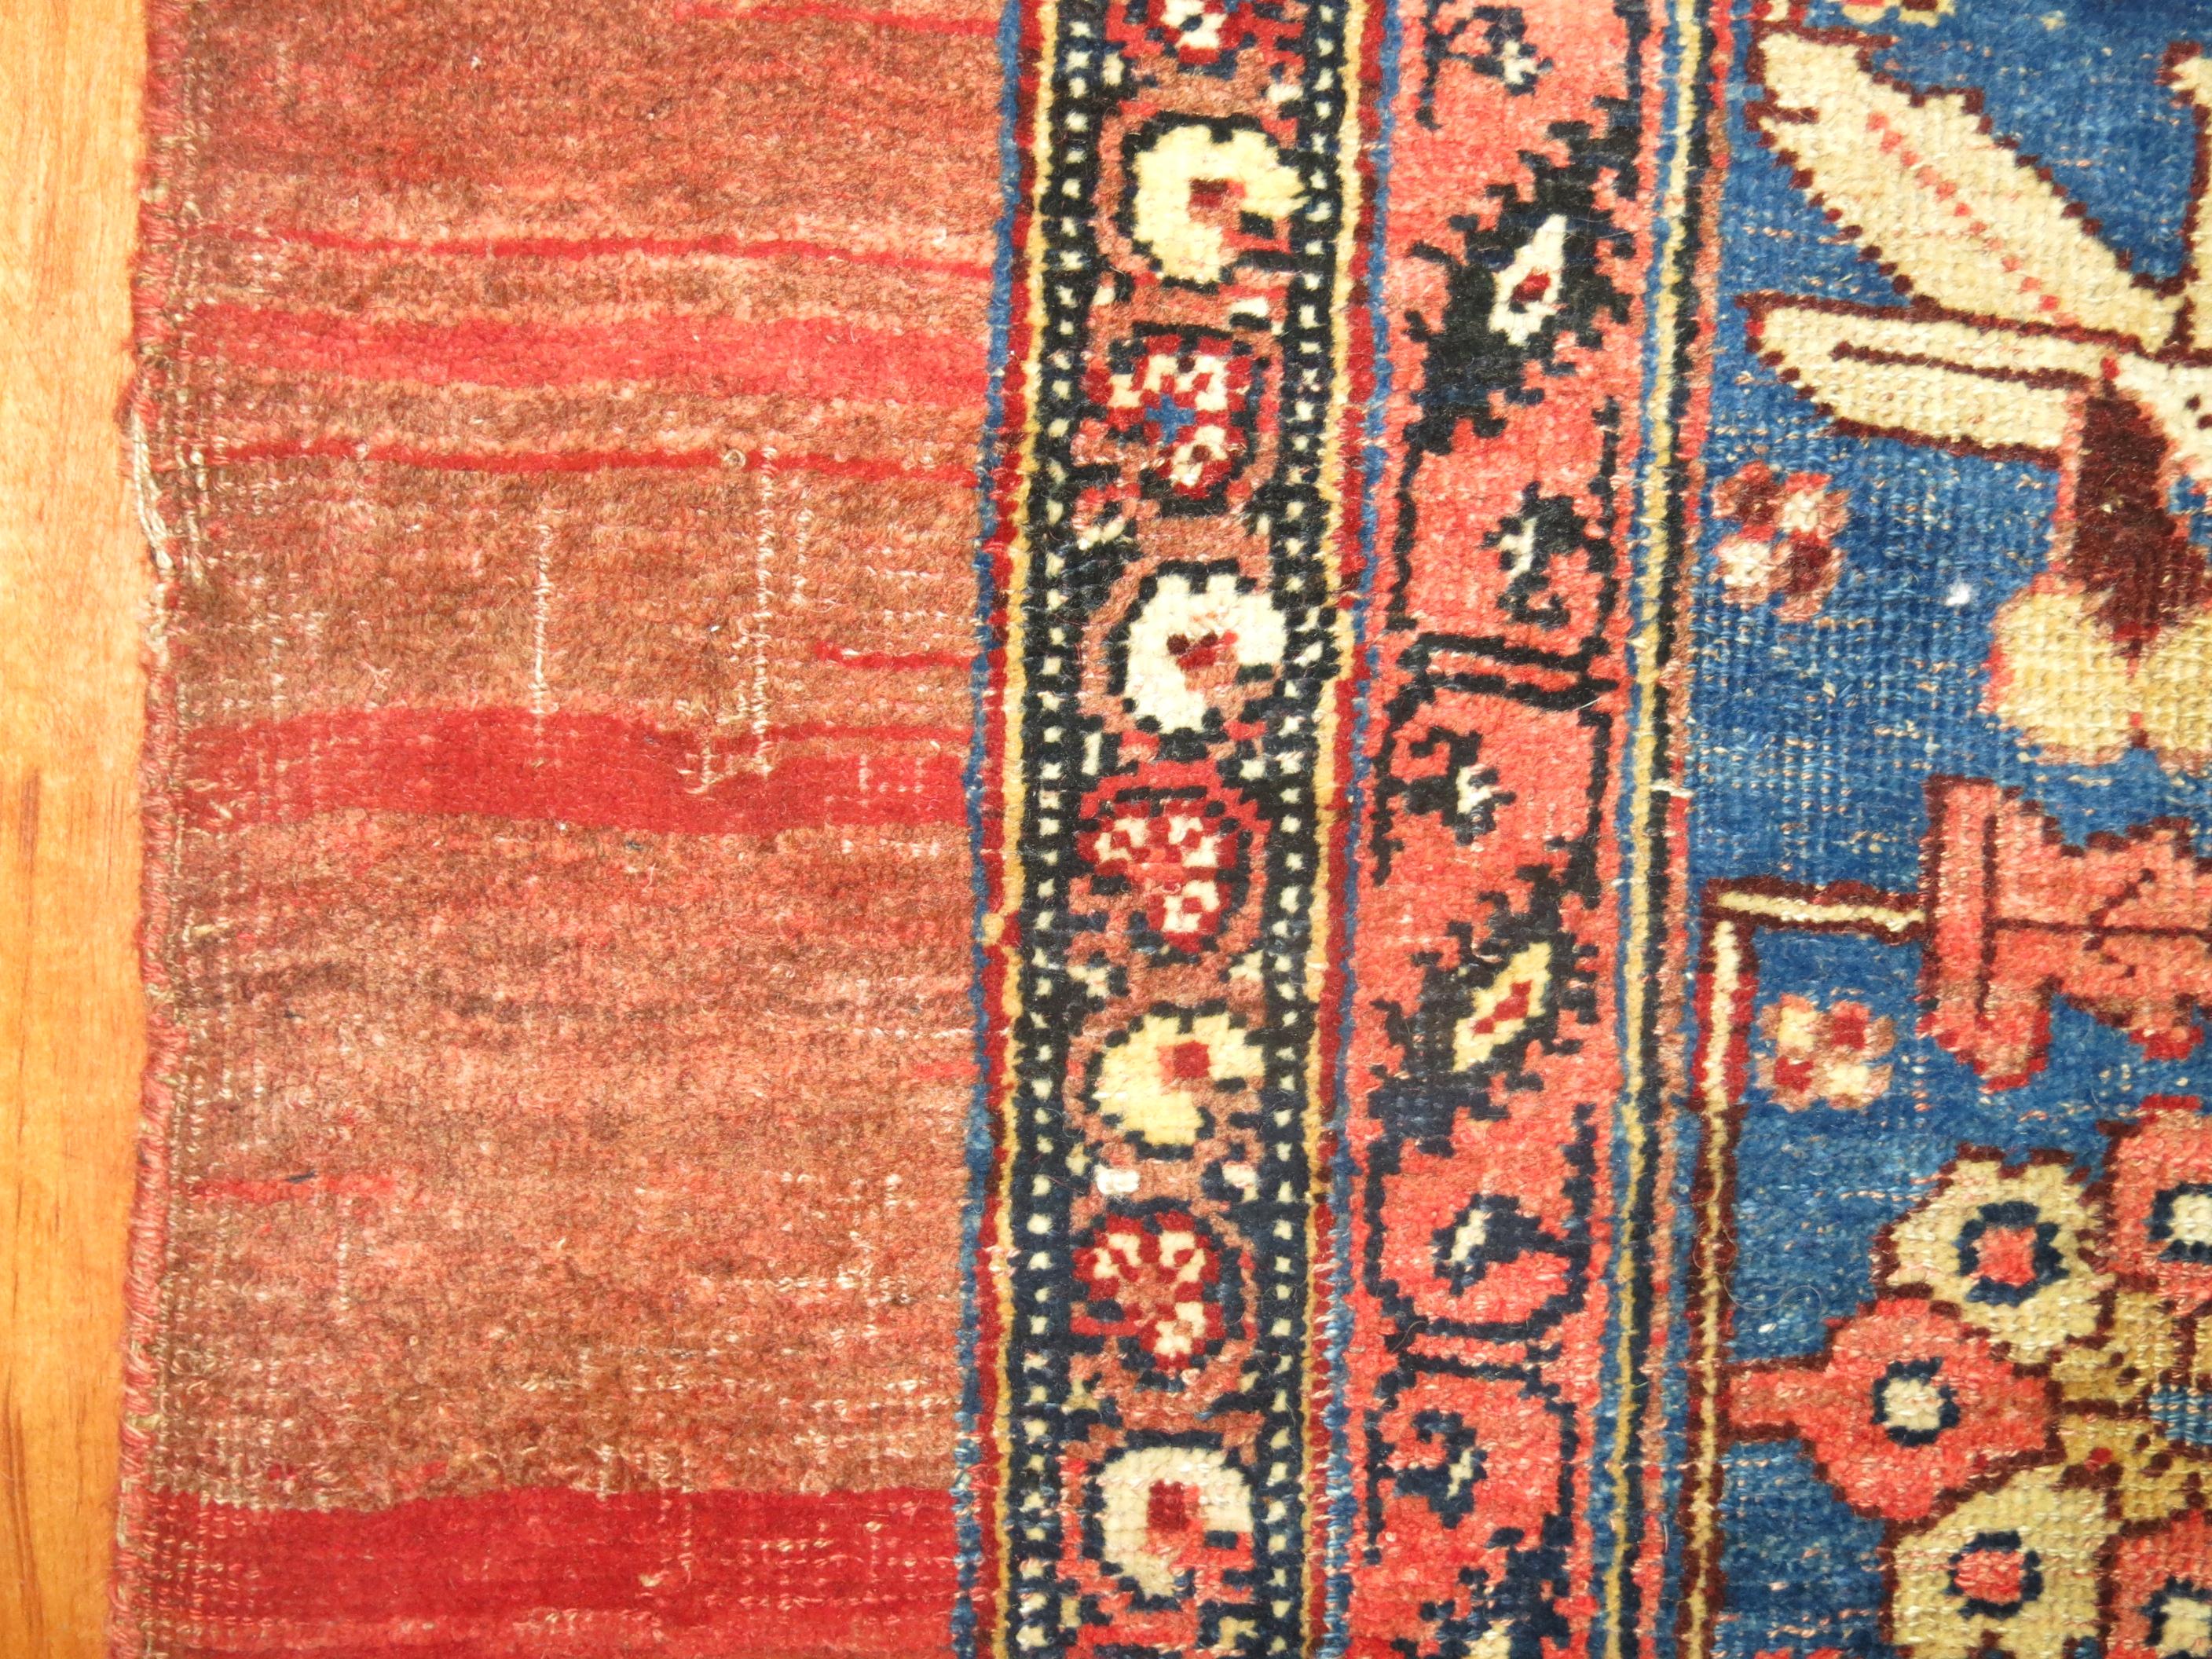 Traditional room size Persian Bidjar rug with a large navy medallion on a soft brick red field and mustard color corner spandrels surrounded by a blue multi band border.

Measures: 7'8” x 11'7”

Bidjar rugs, produced in Northwest Iran are among